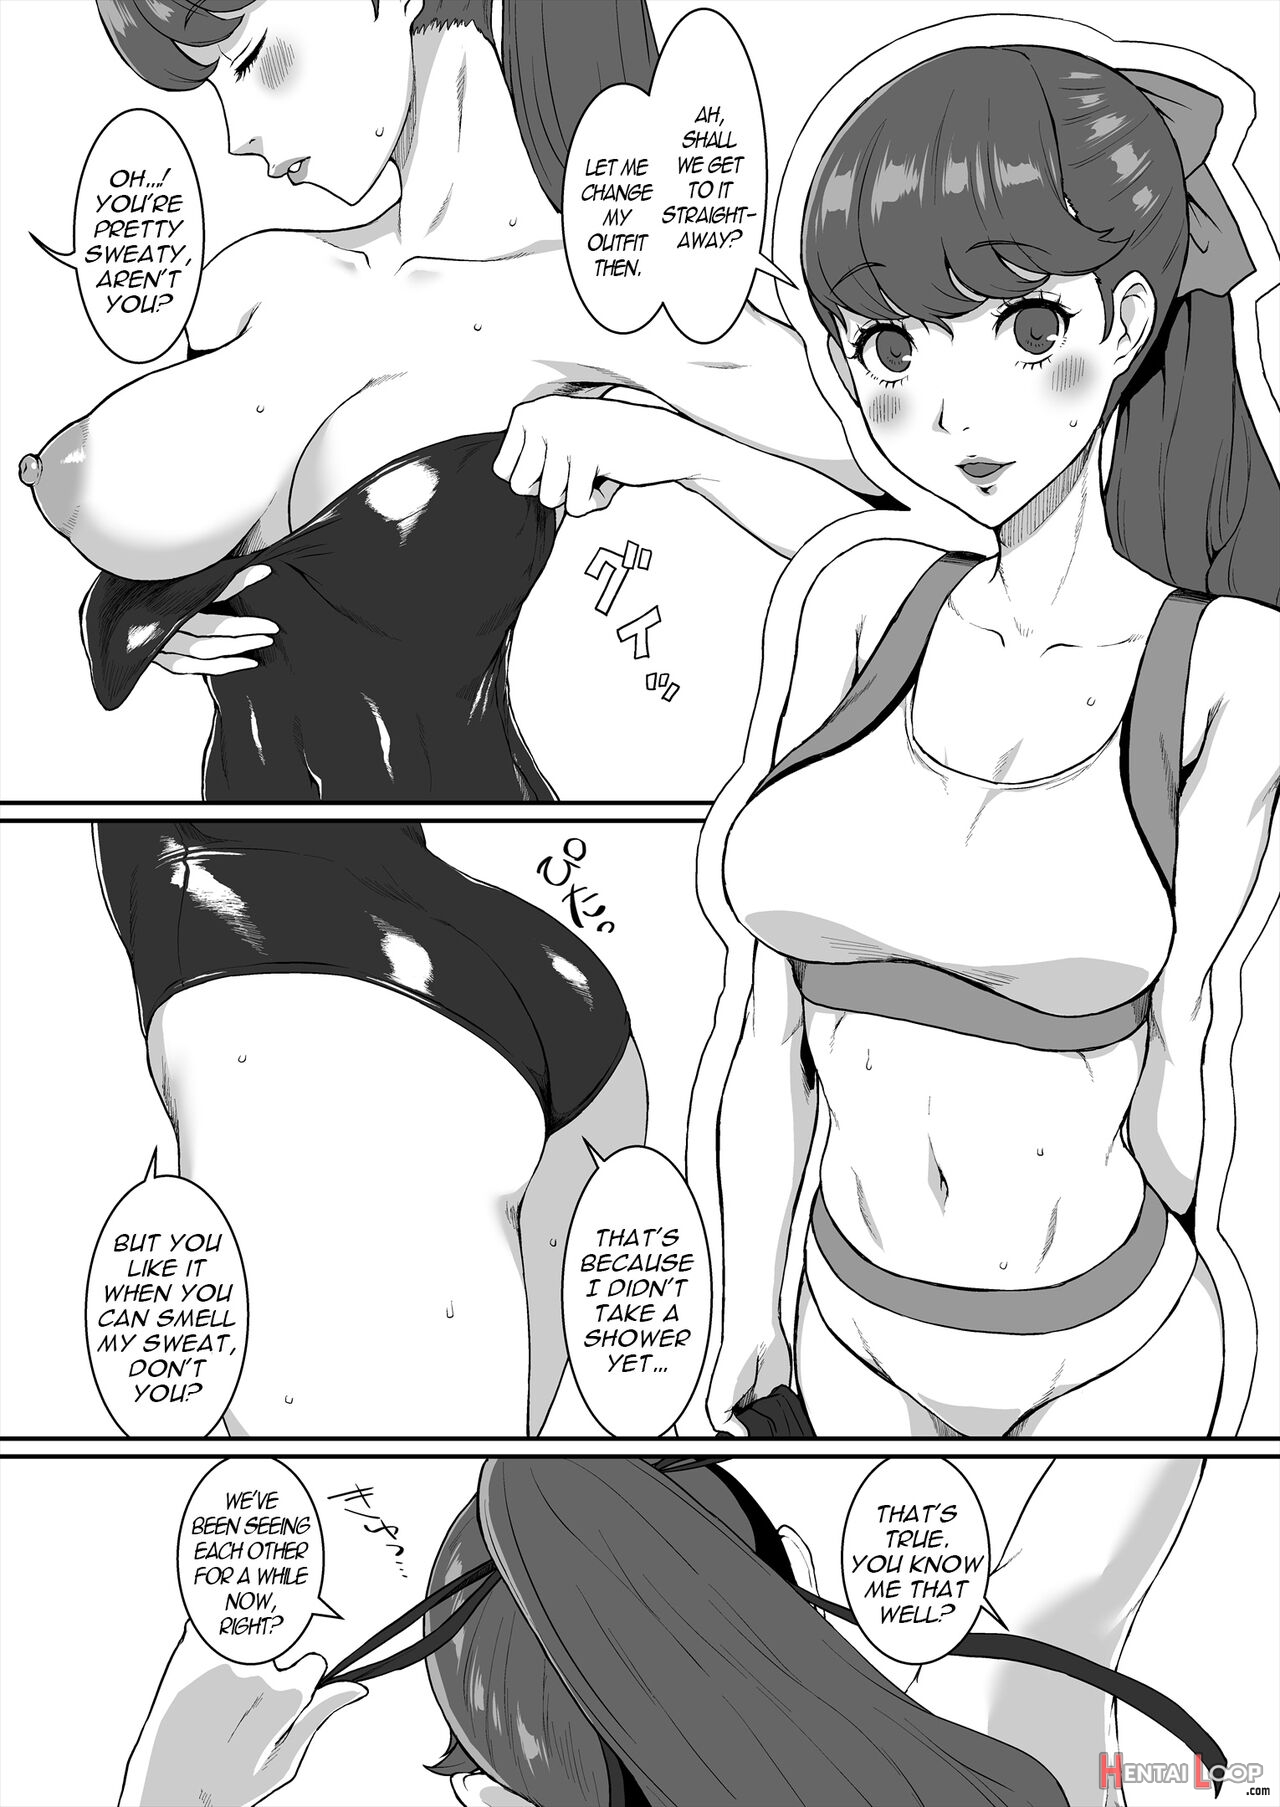 The Other Senpai page 3